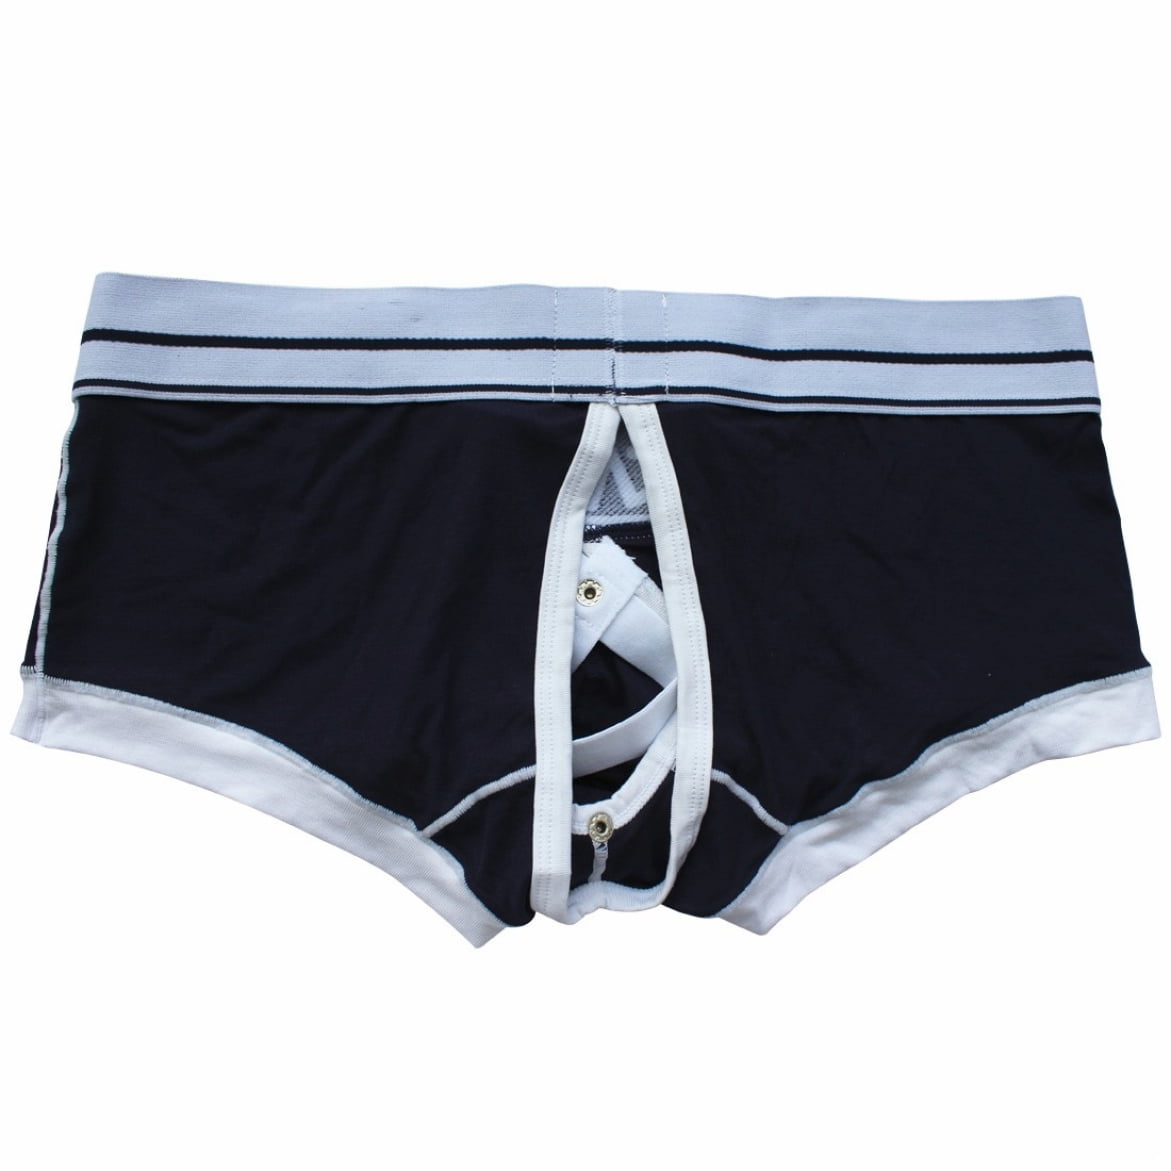 Mens Comfort Fit Boxer Briefs With U Shaped Pouch, Breathable Cotton  Underwear With Supportive Elastic Waistband From Waxeer, $12.92